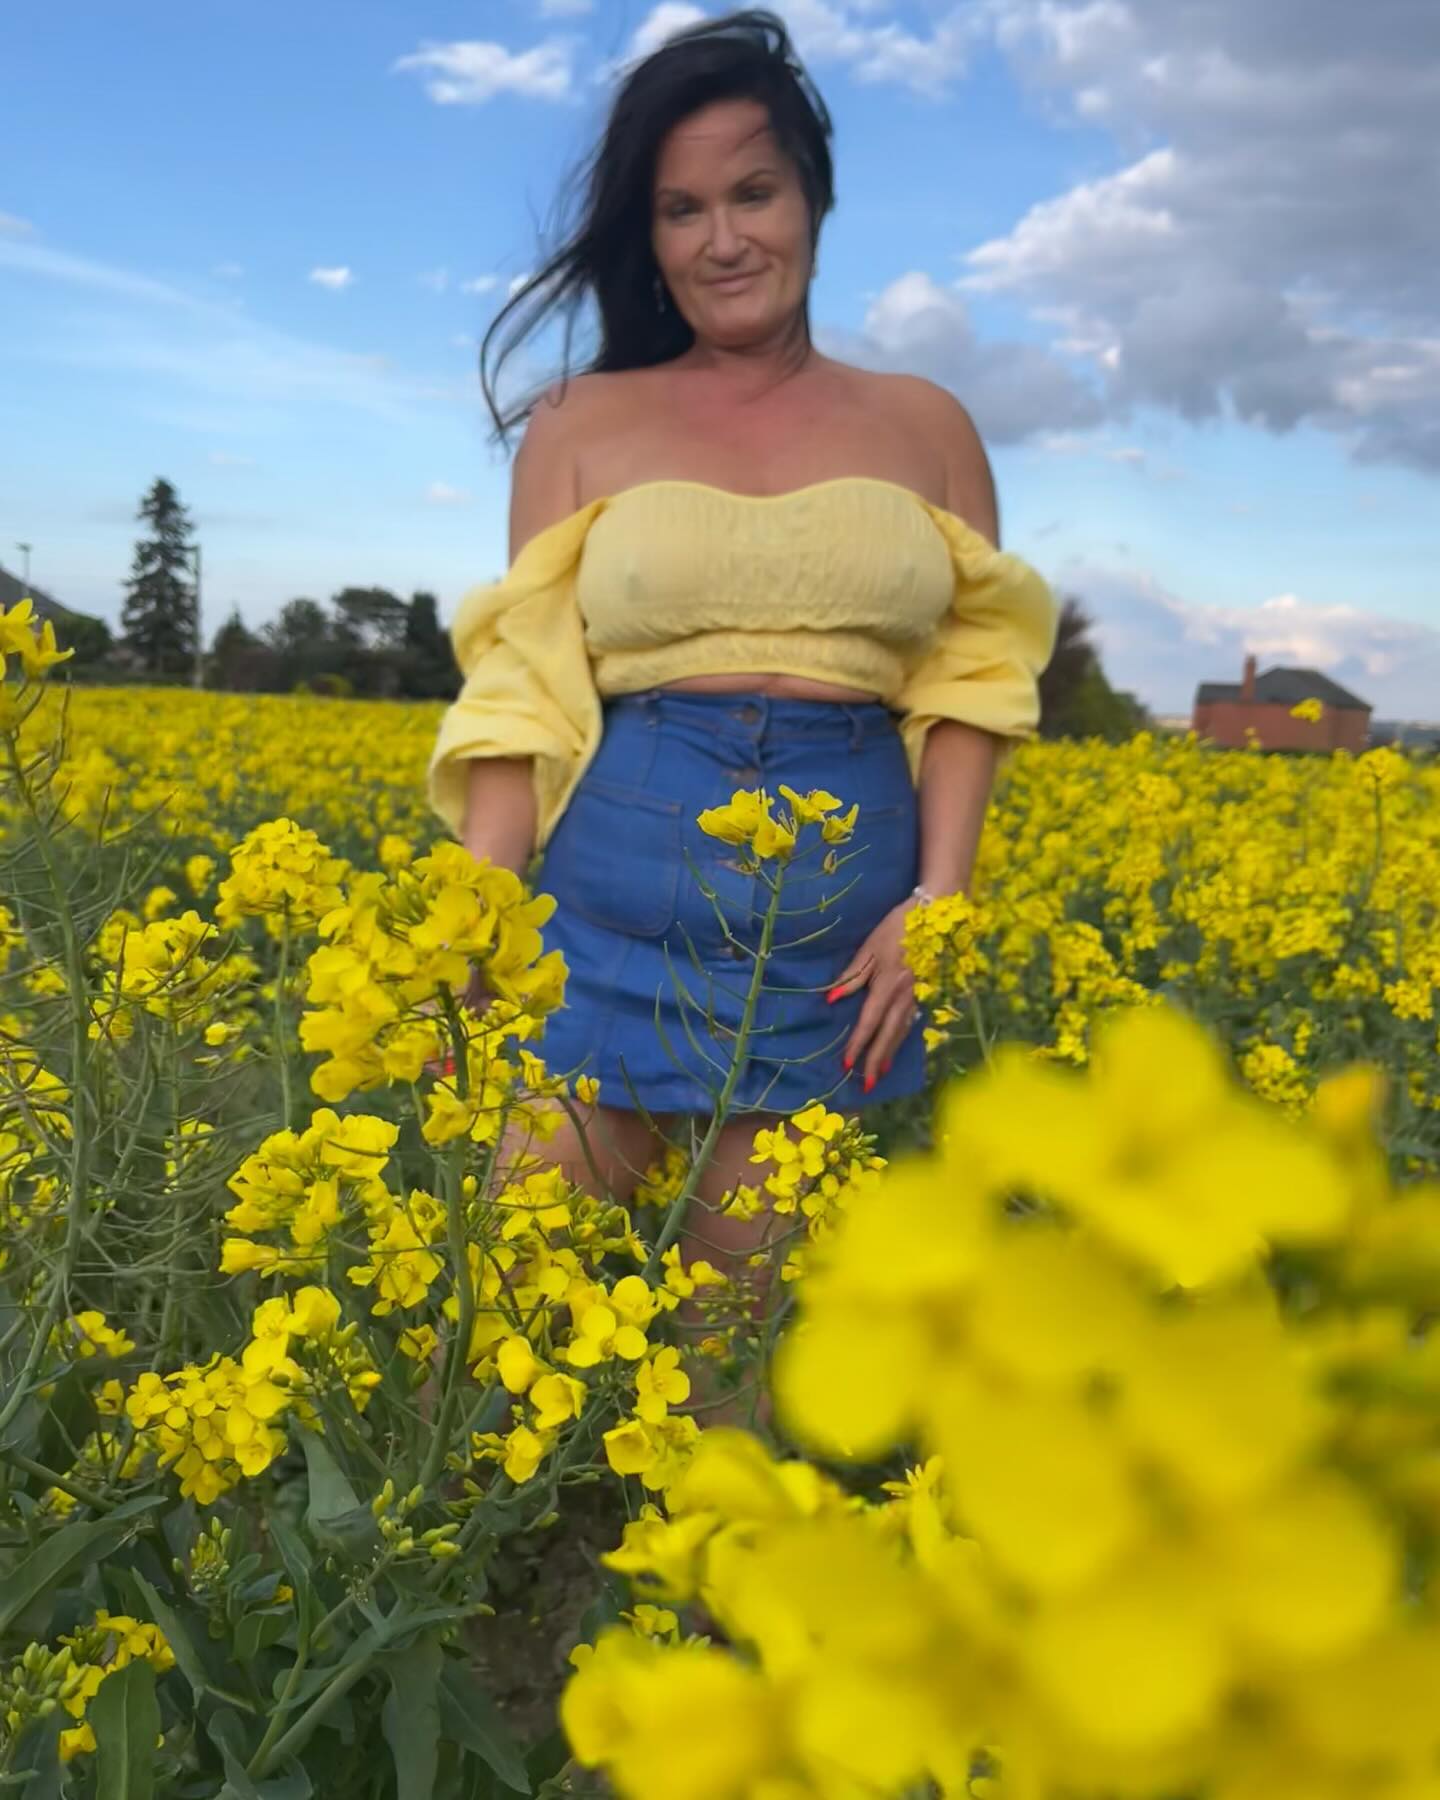 Golden girl ✨
Swipe for more sunny  views ☀️👀🔚
Hello Happy Tuesday ! Brightening up your week , made the most of the sunshine, was lovely to see some blue sky 💙
Yellow crop with floaty sleeves & denim mini skirt in a felid of yellow 🤩🌿💛☀️
.
.
.
.
.
.
#ootd #miniskirt #croptop #romantic #pretty #cute #style #sunshine #mellowyellow #brunette #beautiful #womensfashion #springfashion